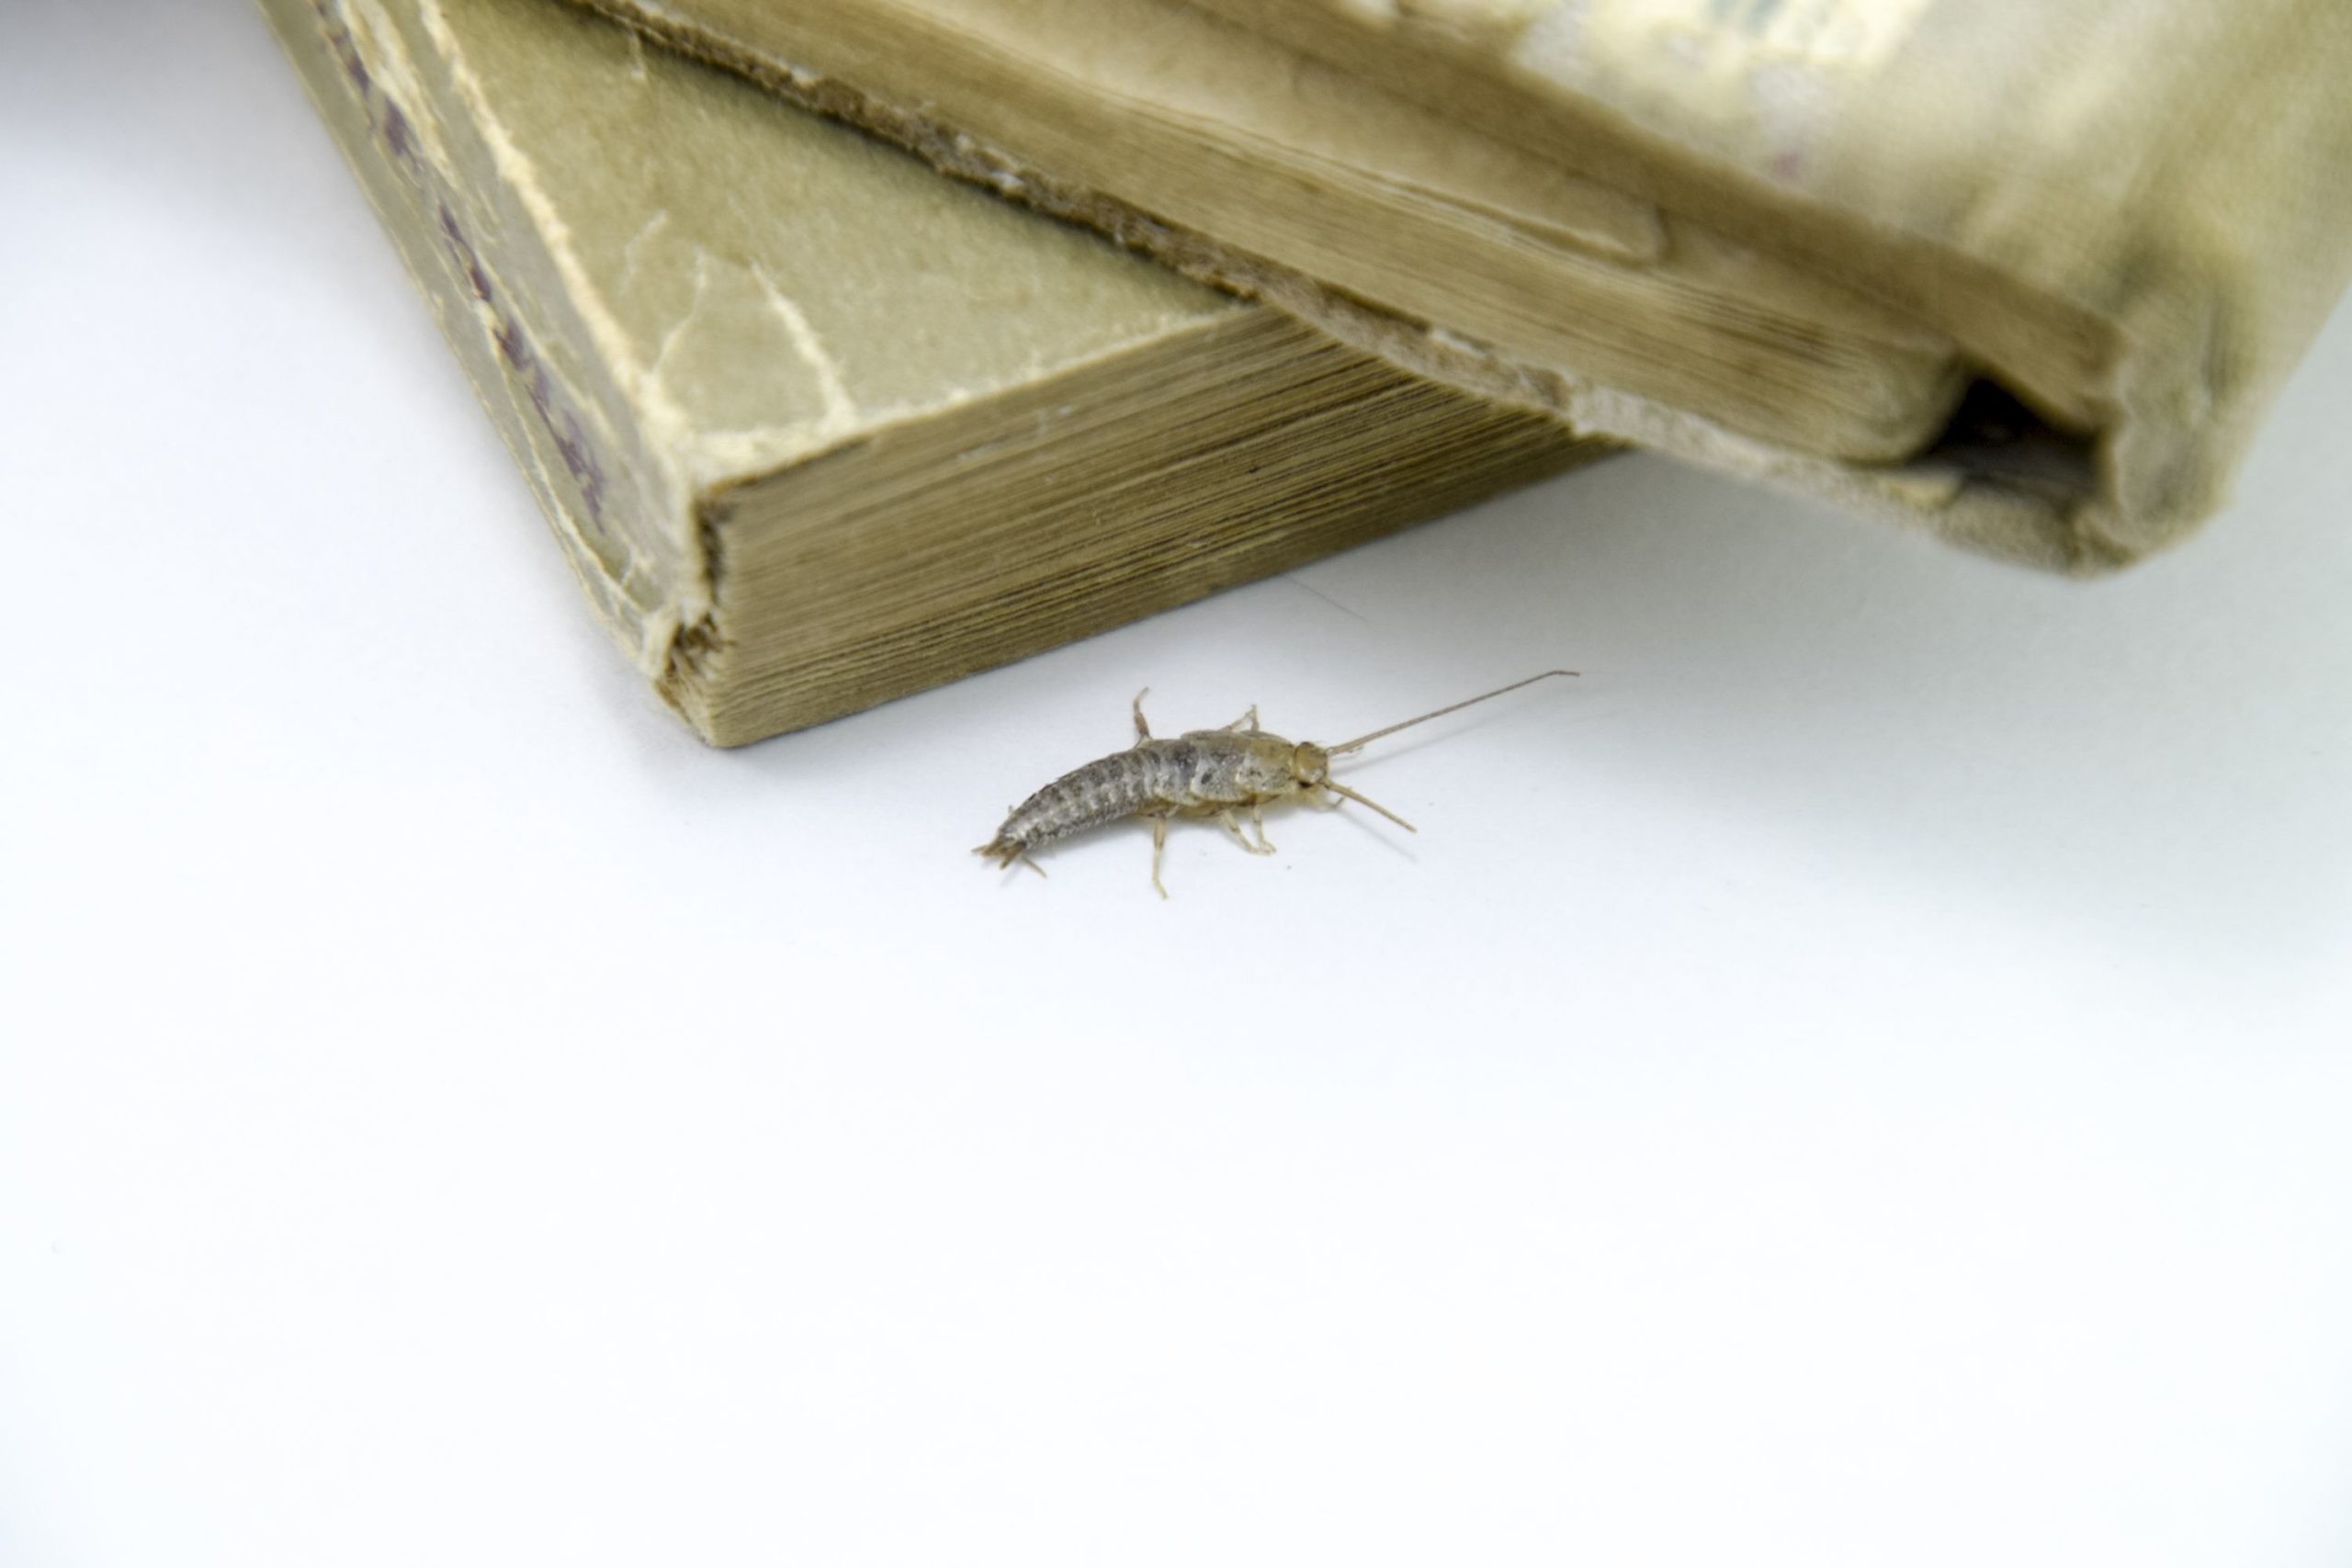 a silverfish crawling beside old books